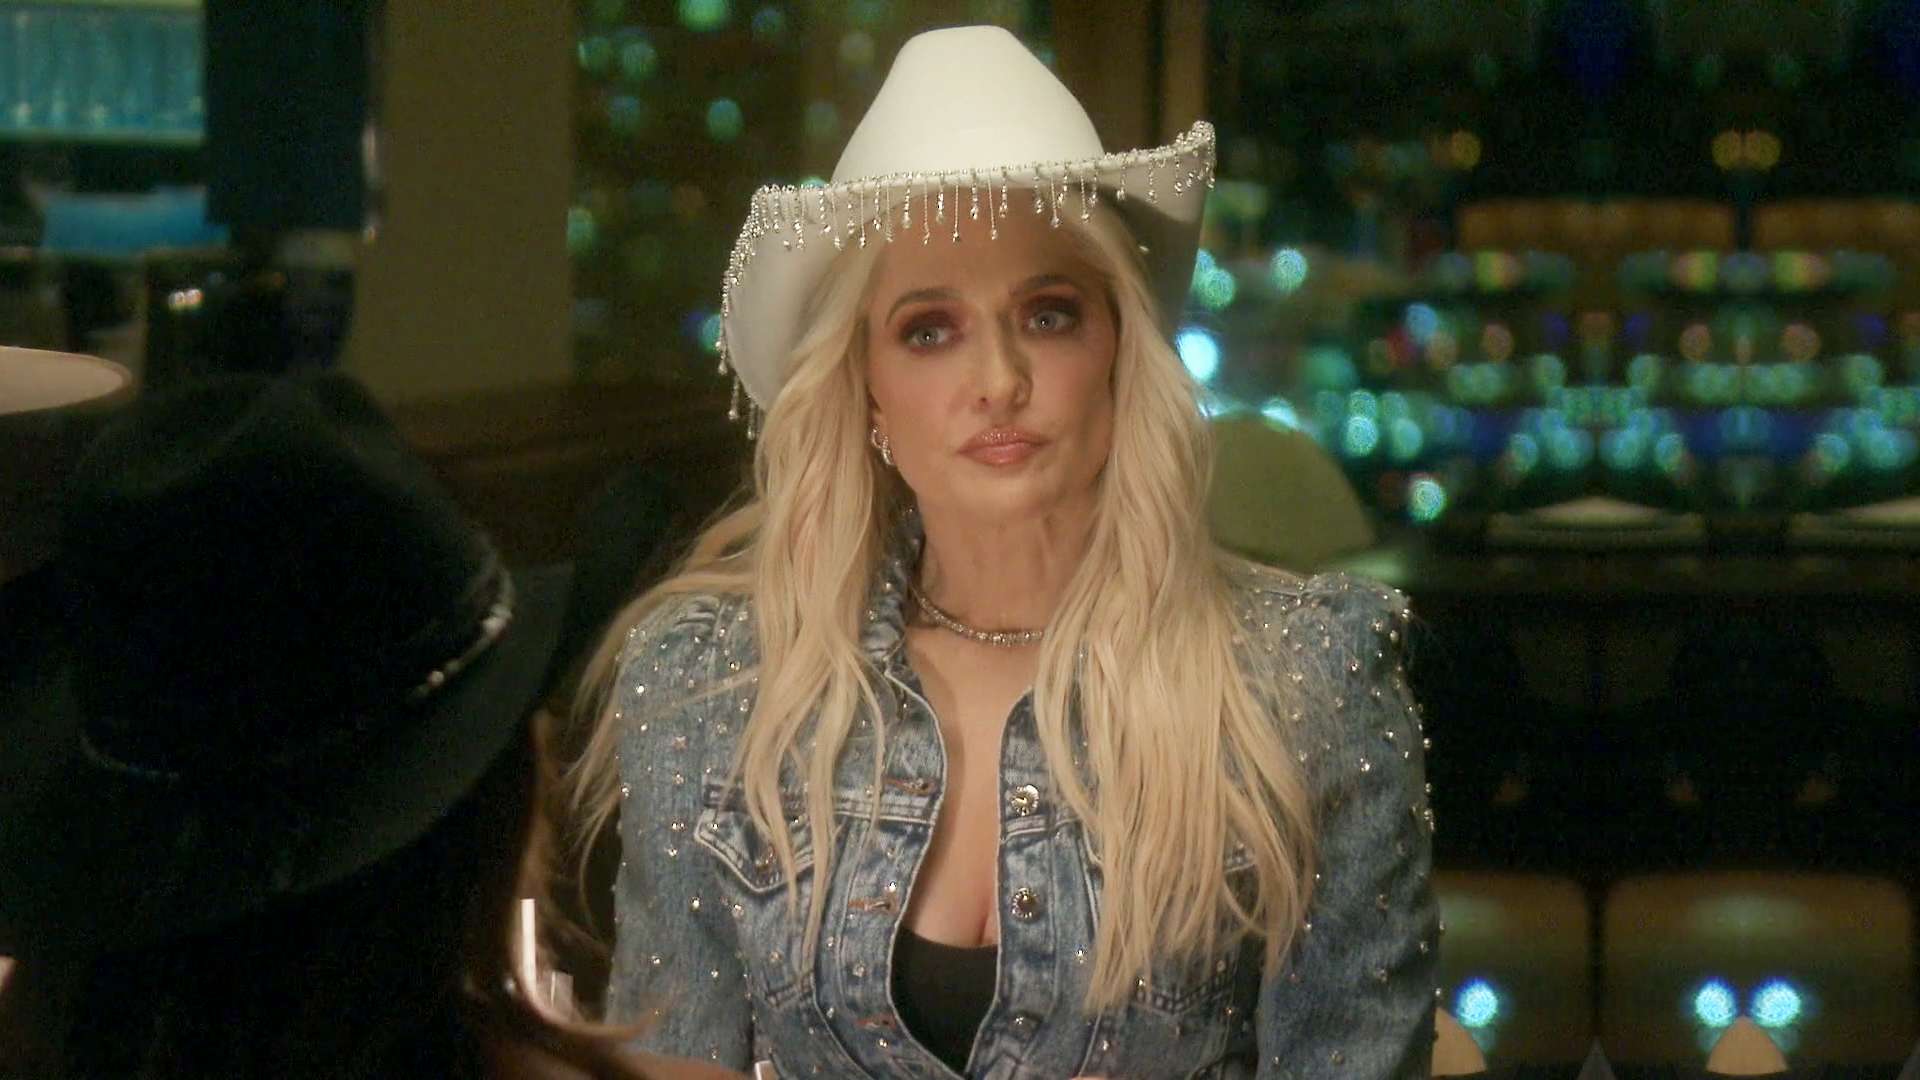 Erika Jayne – The Real Housewives of Beverly Hills | Season 13 Episode 4